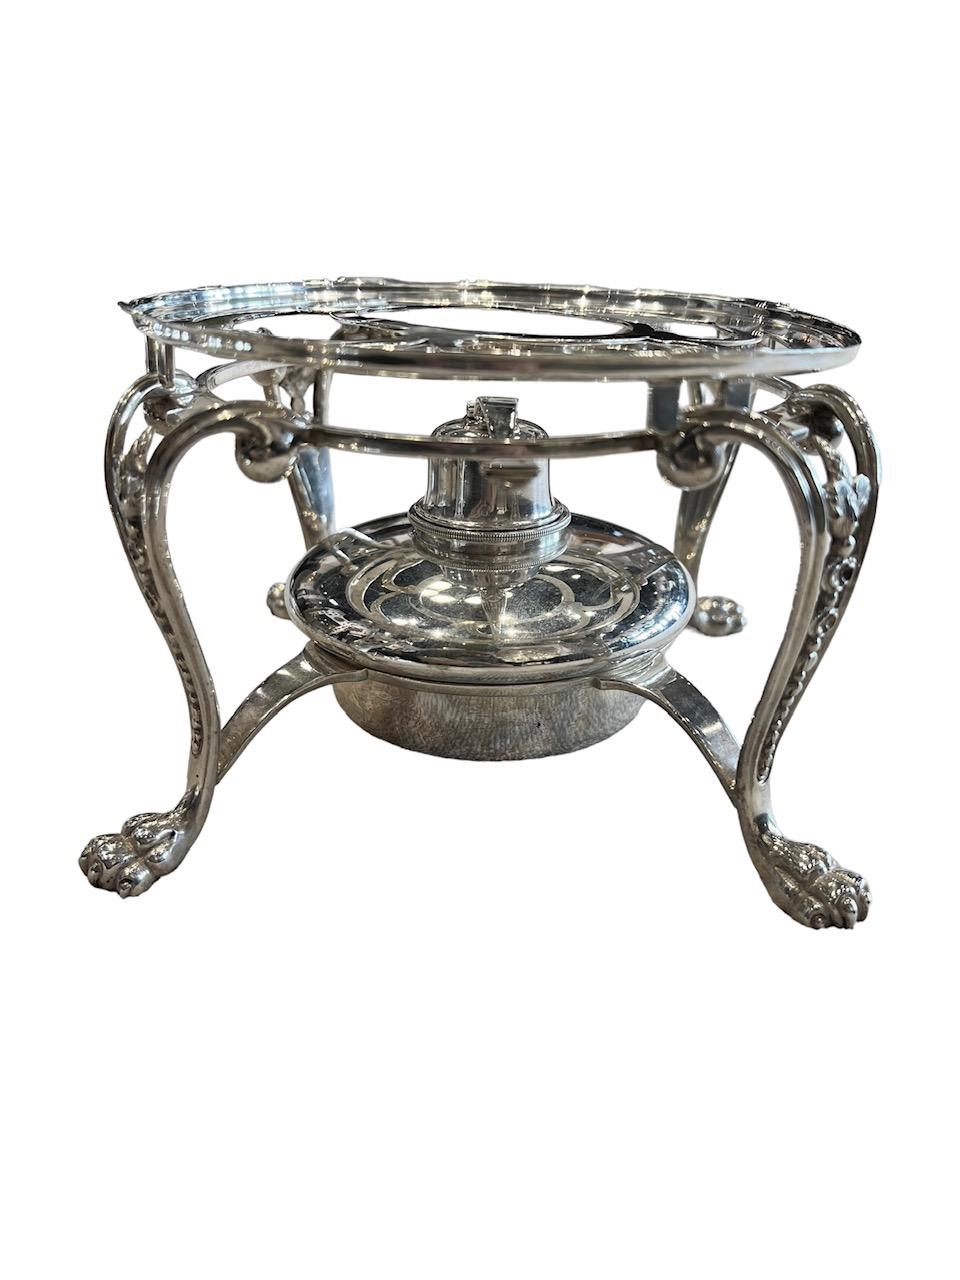 Tiffany and Co Sterling Silver Chafing Dish with Warmer, 19th Century For Sale 3